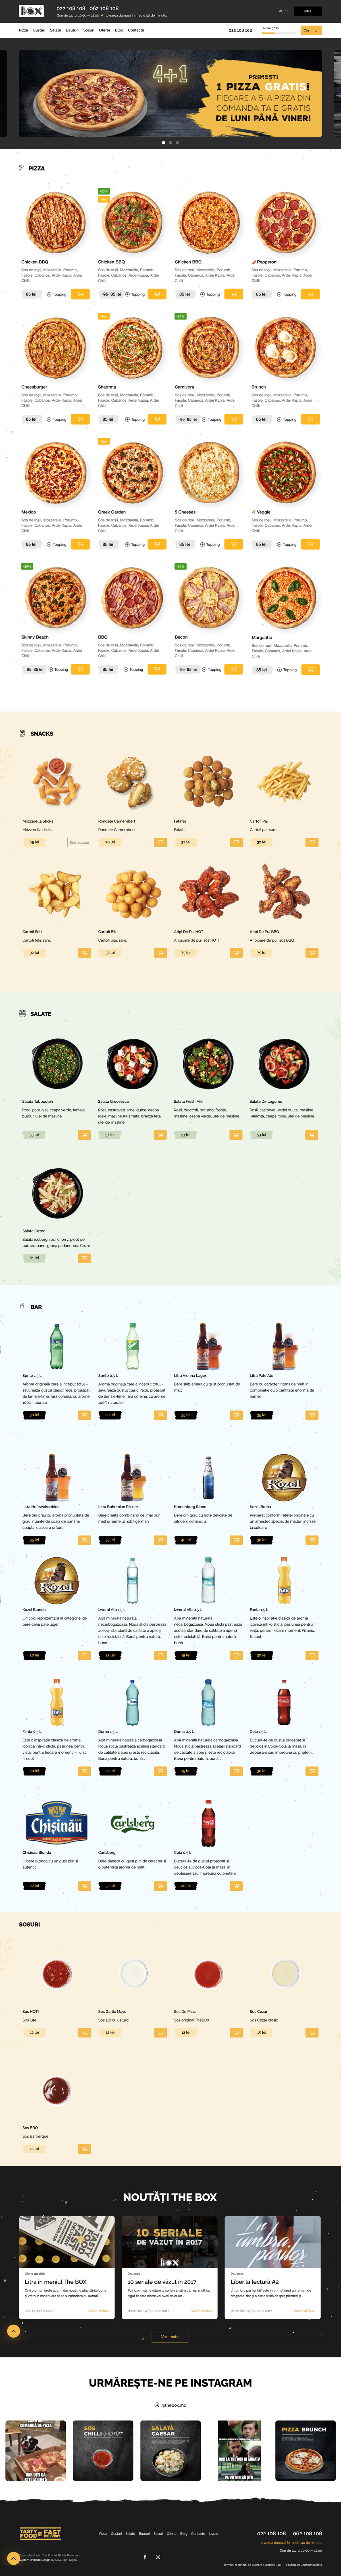 the box website design for pizza delivery